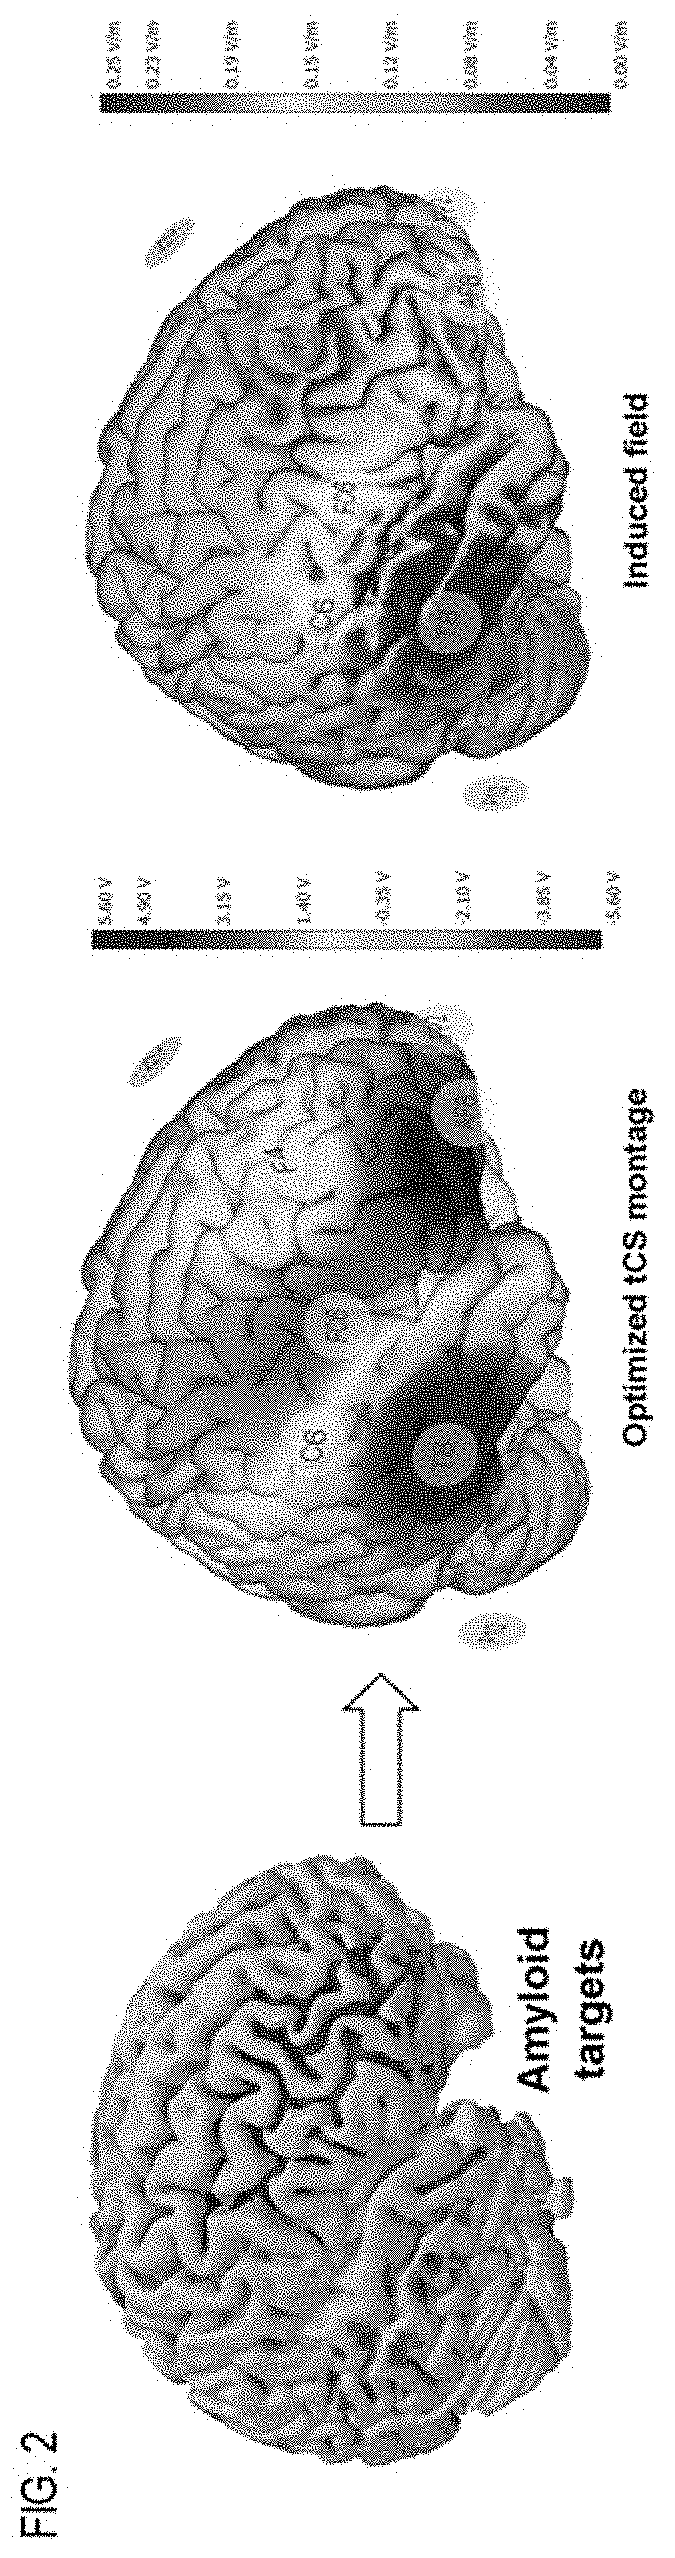 Systems and methods for treating brain disease using targeted neurostimulation